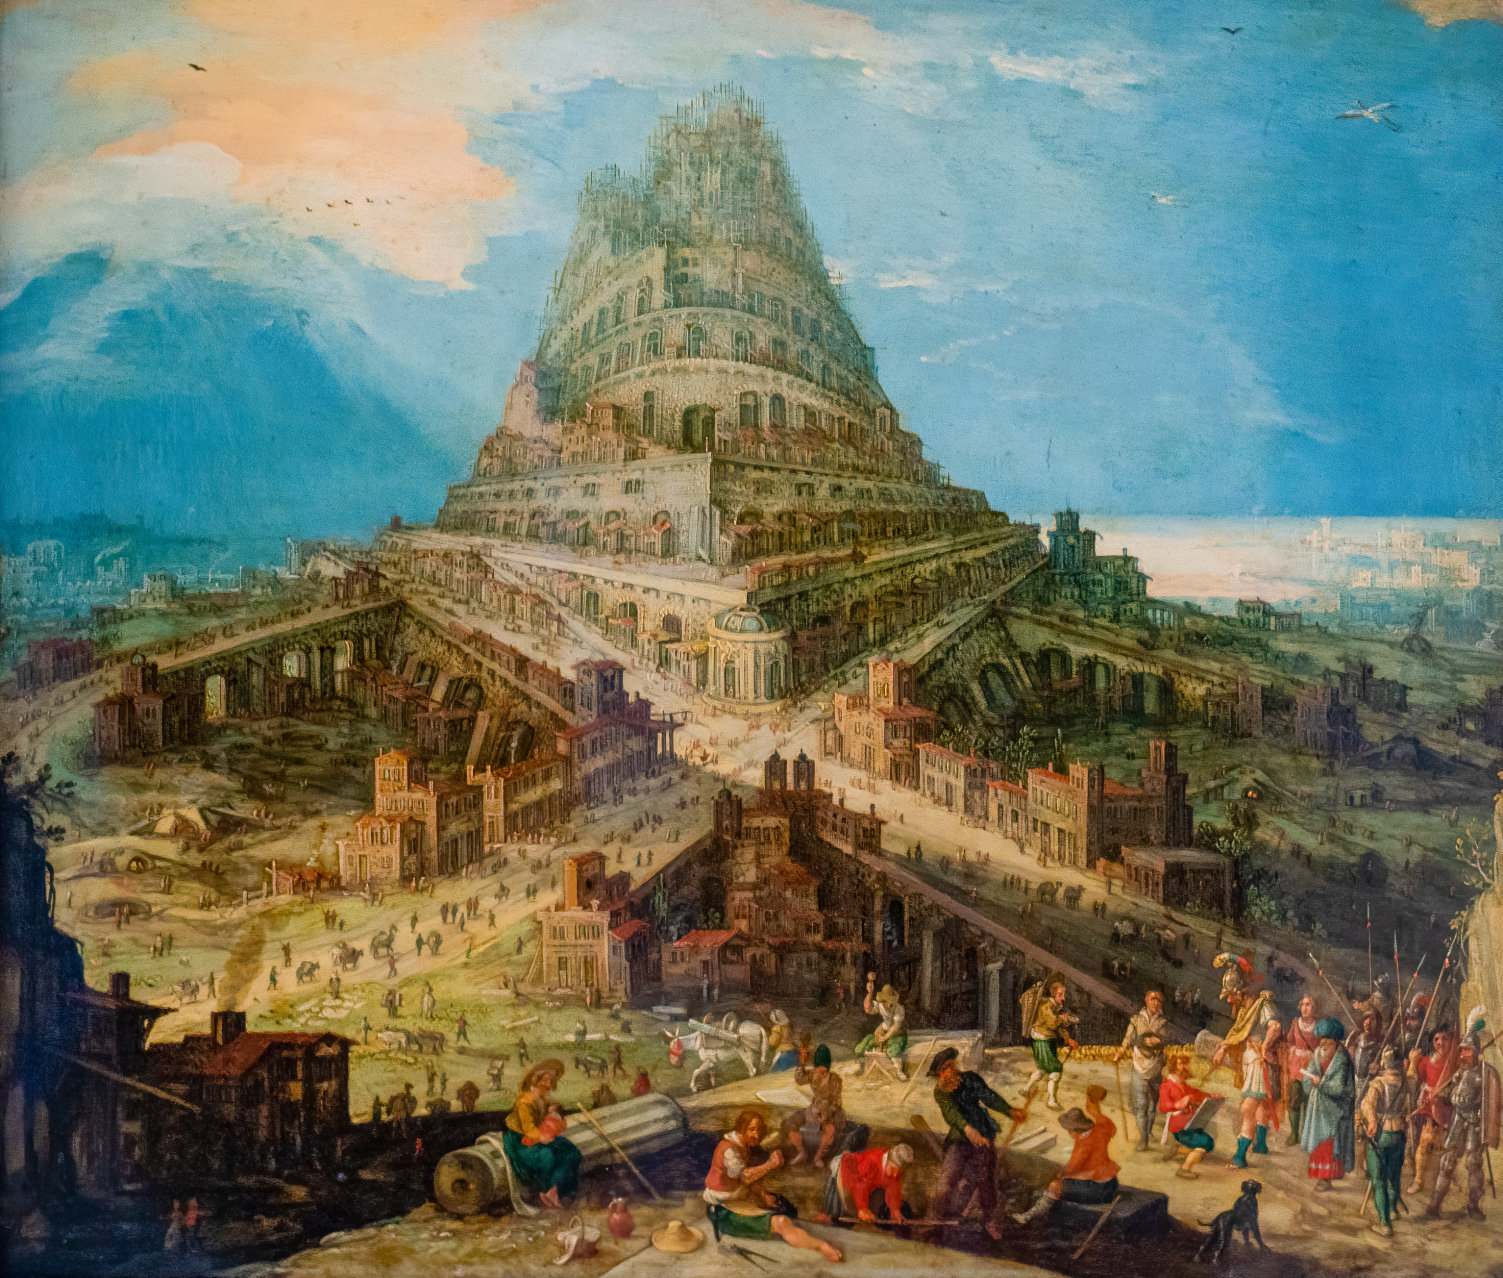 First evidence of Biblical Tower of Babel discovered 2